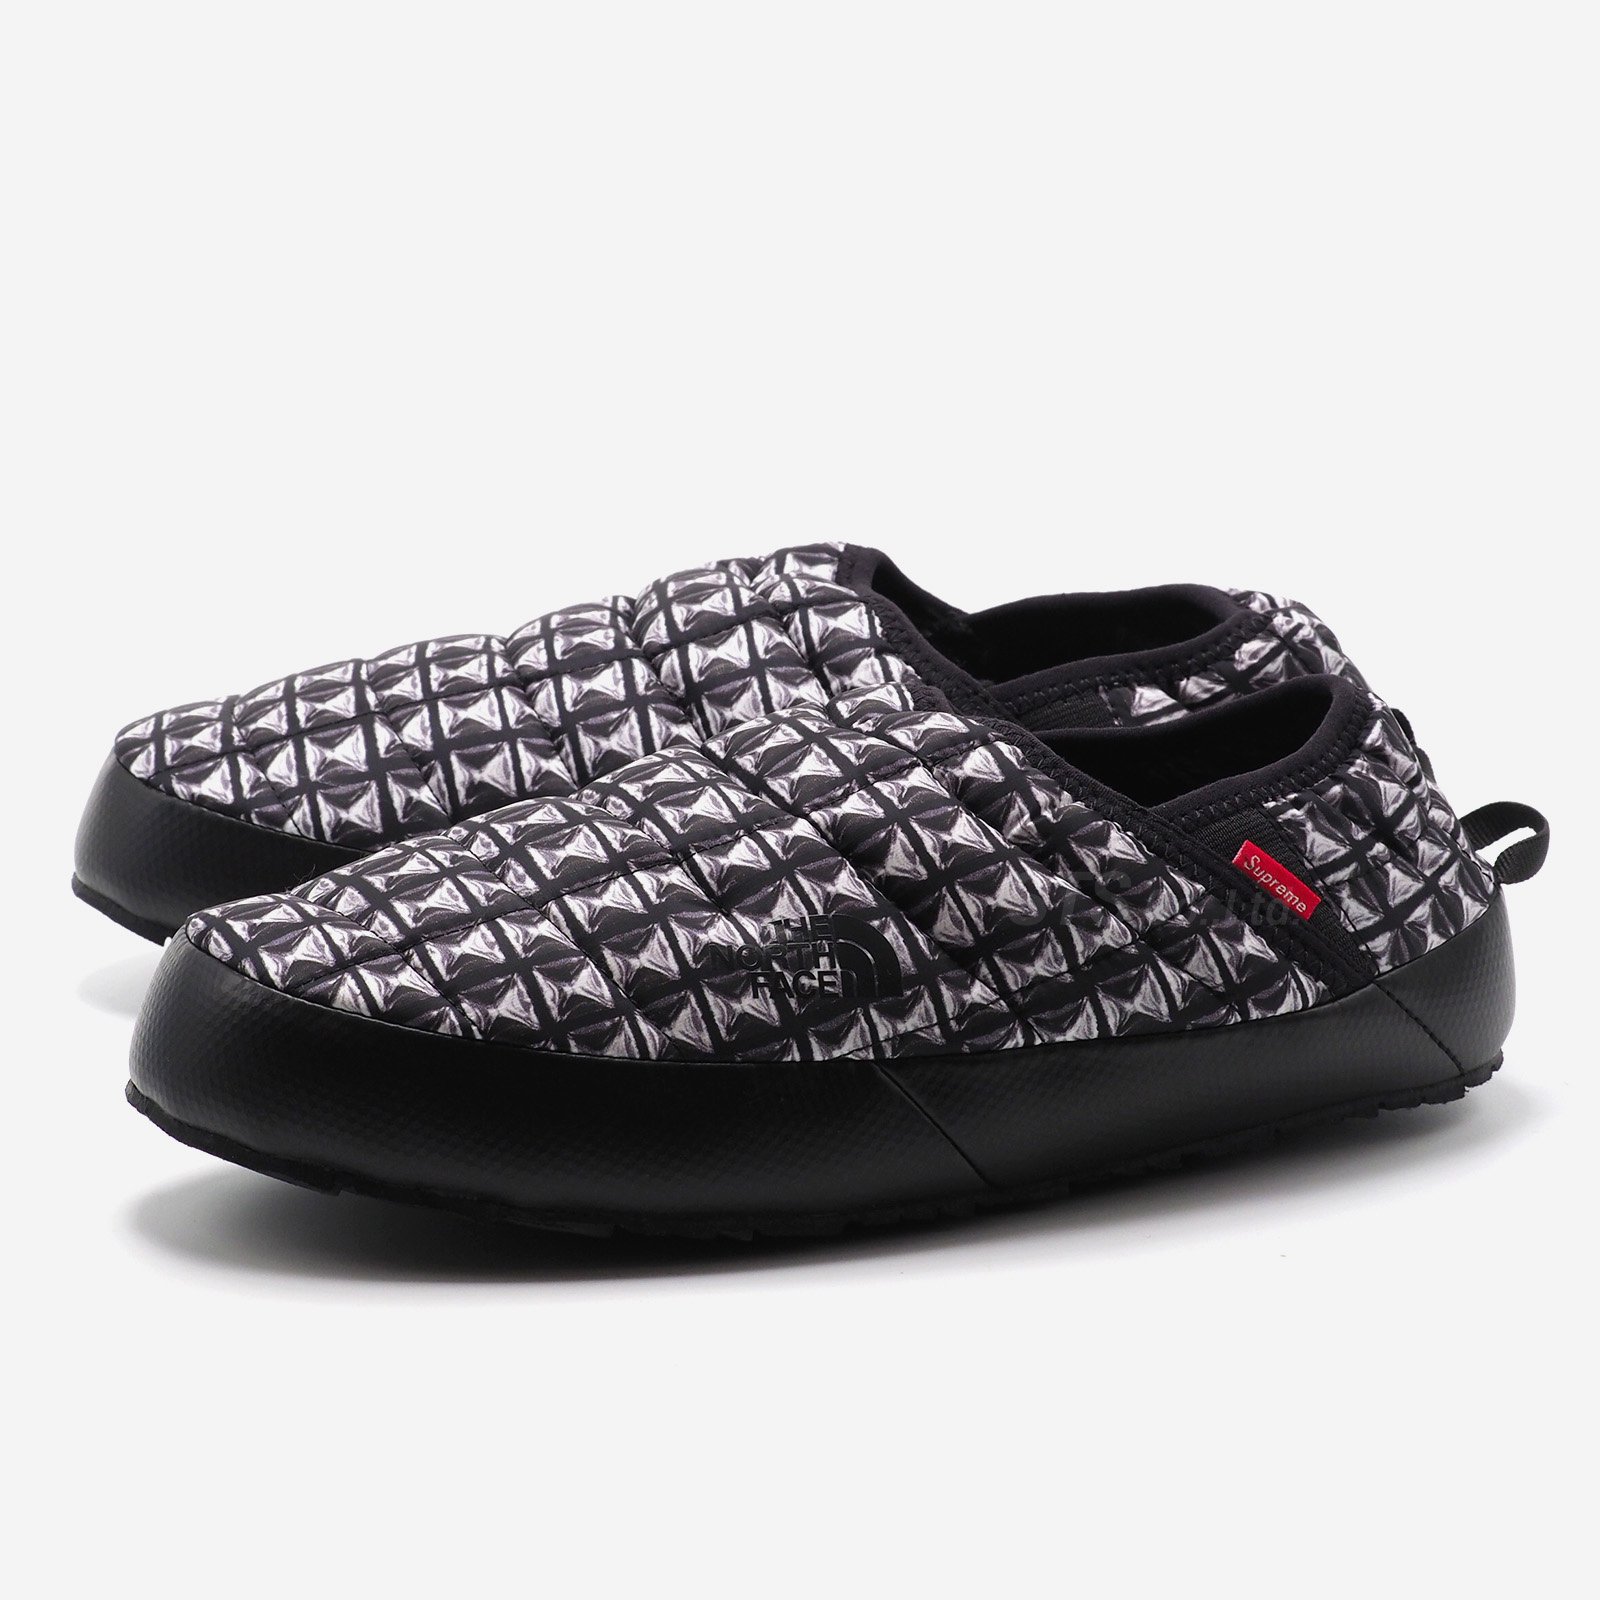 SUPREME STUDDED TRACTION MULE